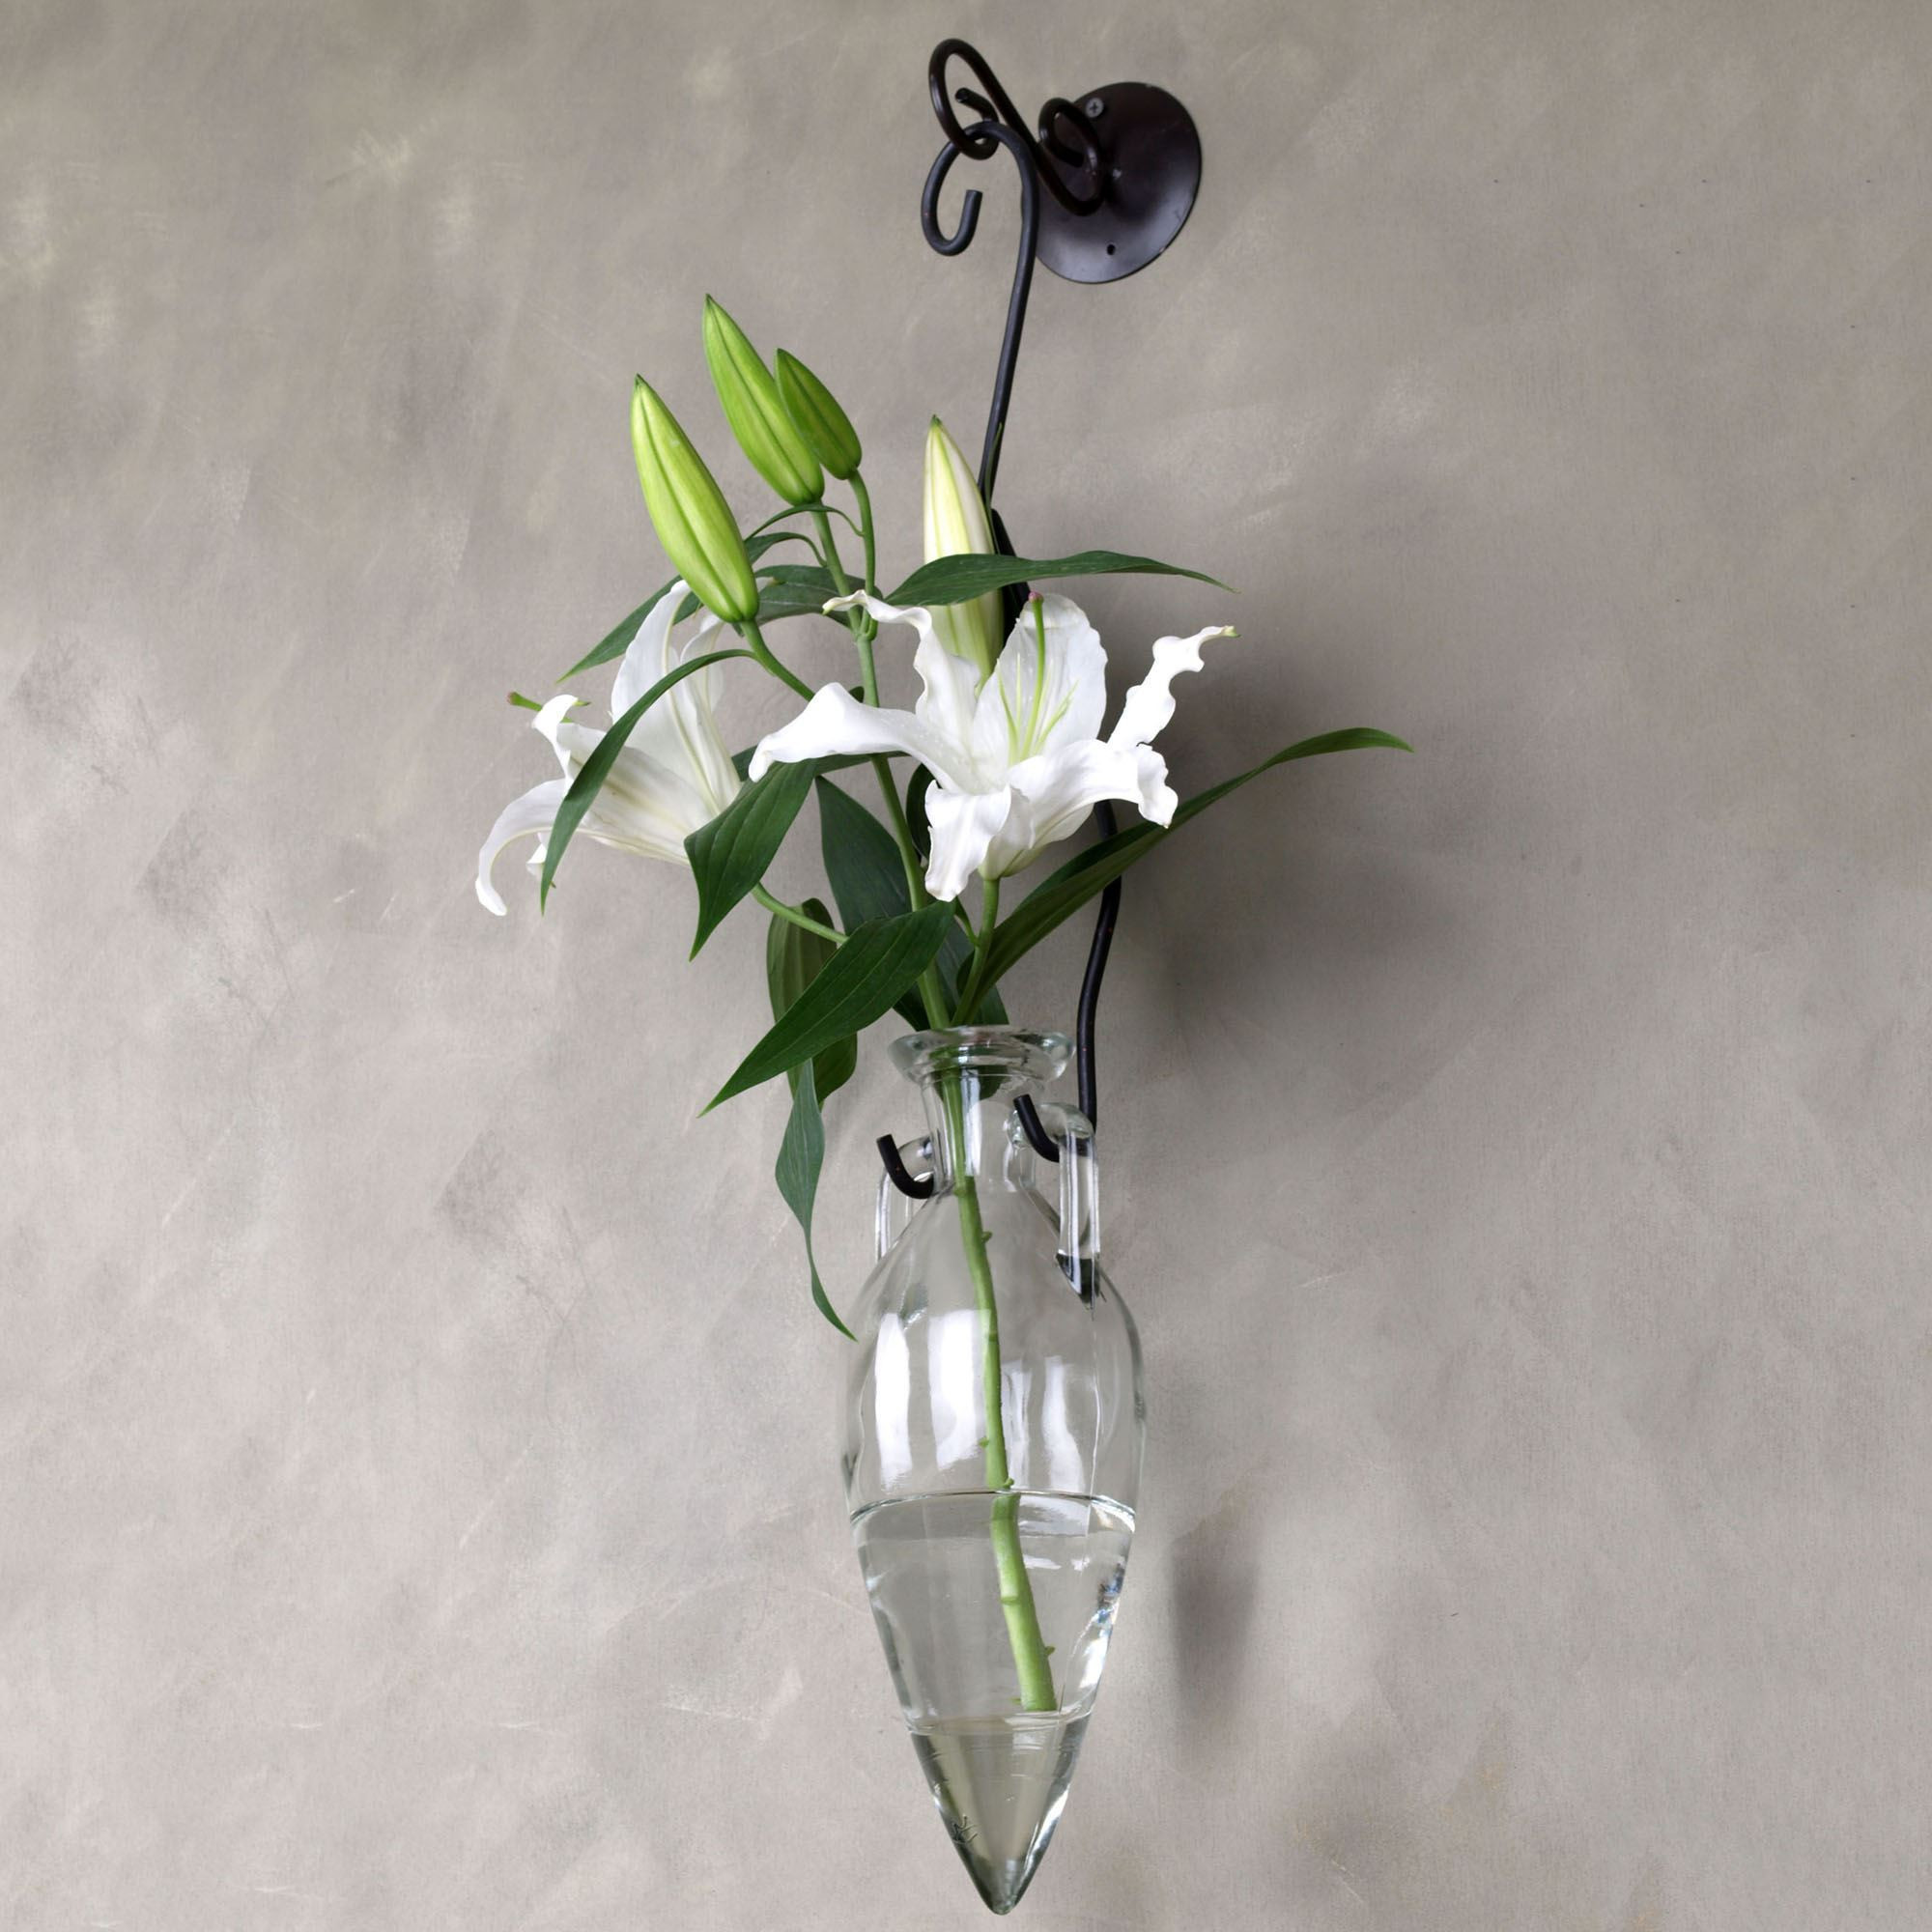 16 Awesome Metal Vases wholesale 2024 free download metal vases wholesale of cheap metal vases photograph h vases wall hanging flower vase with regard to cheap metal vases photograph h vases wall hanging flower vase newspaper i 0d scheme wall